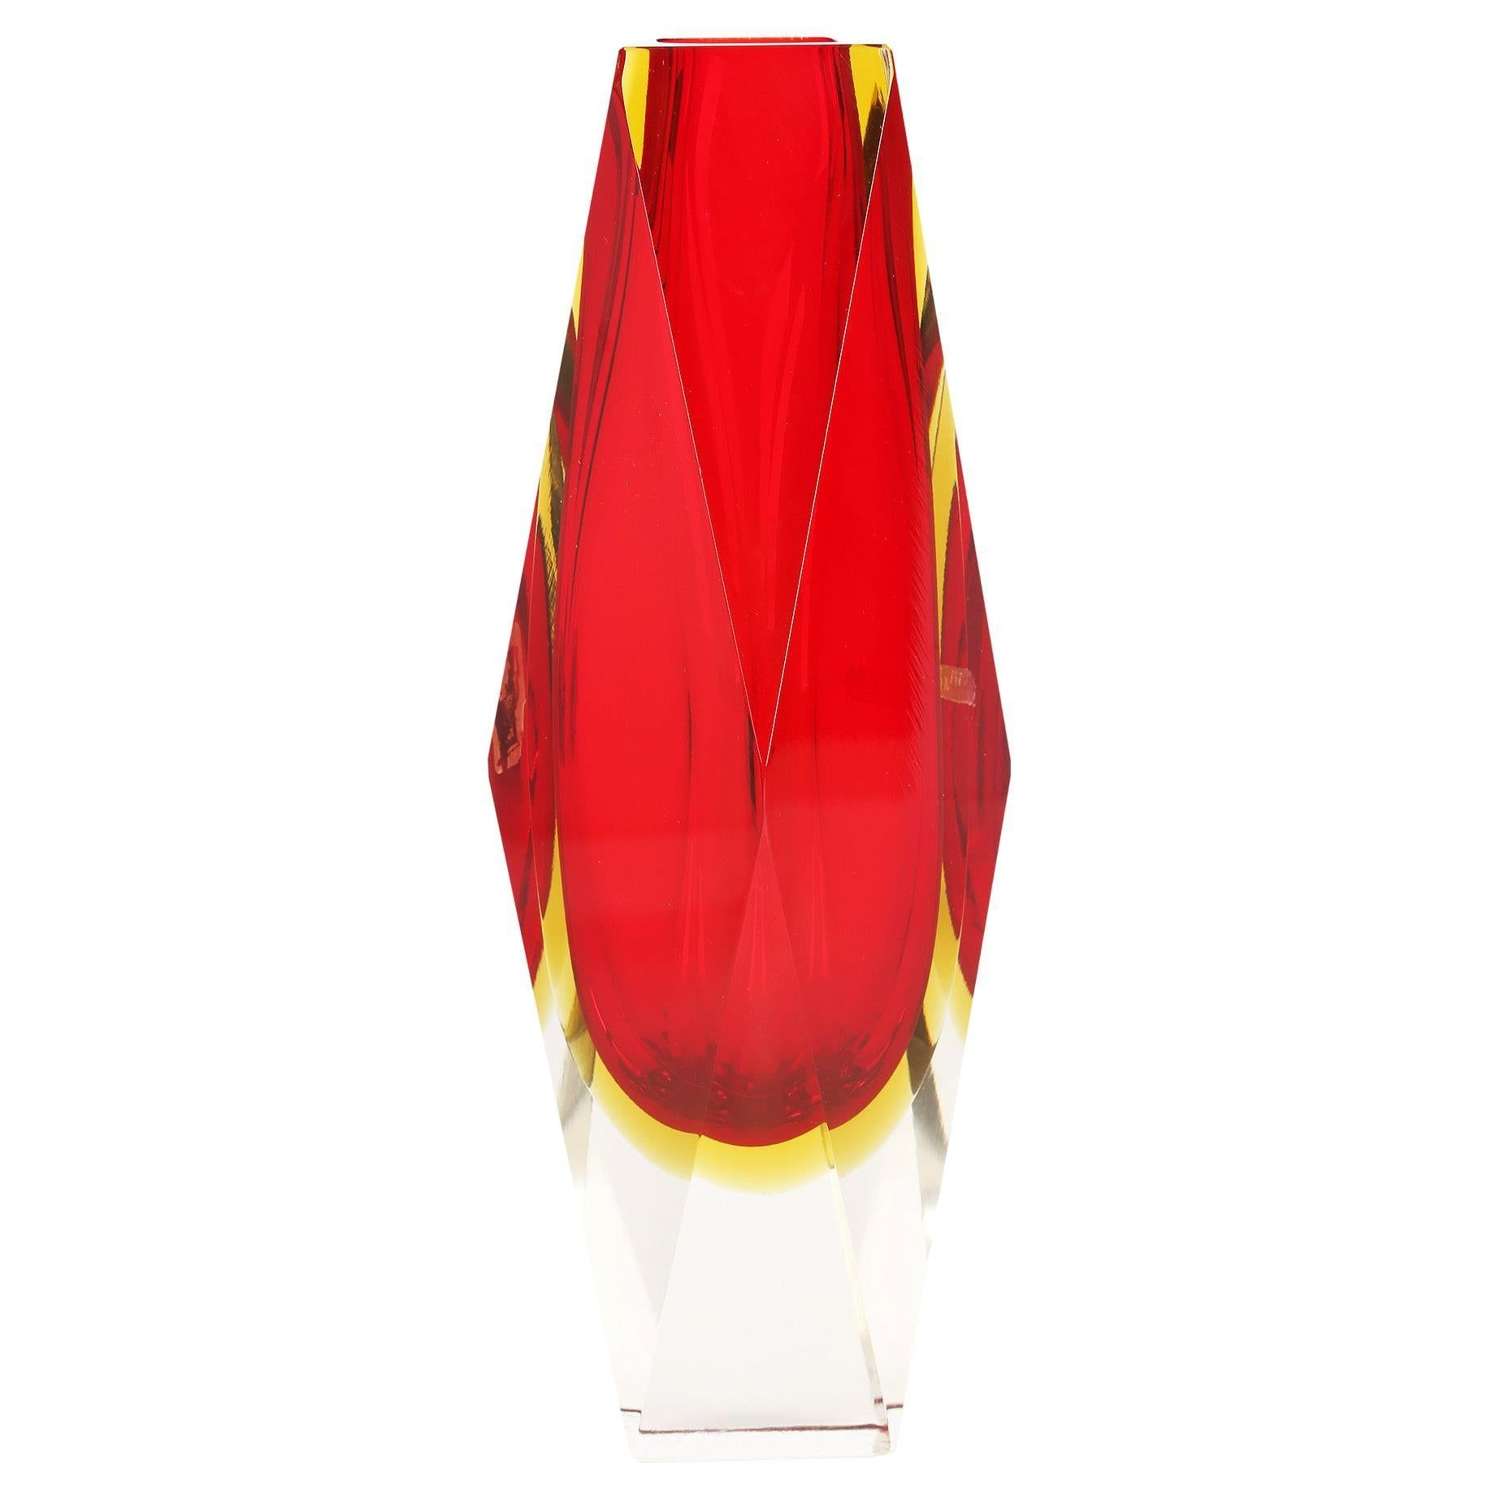 Pagnin & Bon Italian Murano Red and Yellow Sommerso Glass Vase